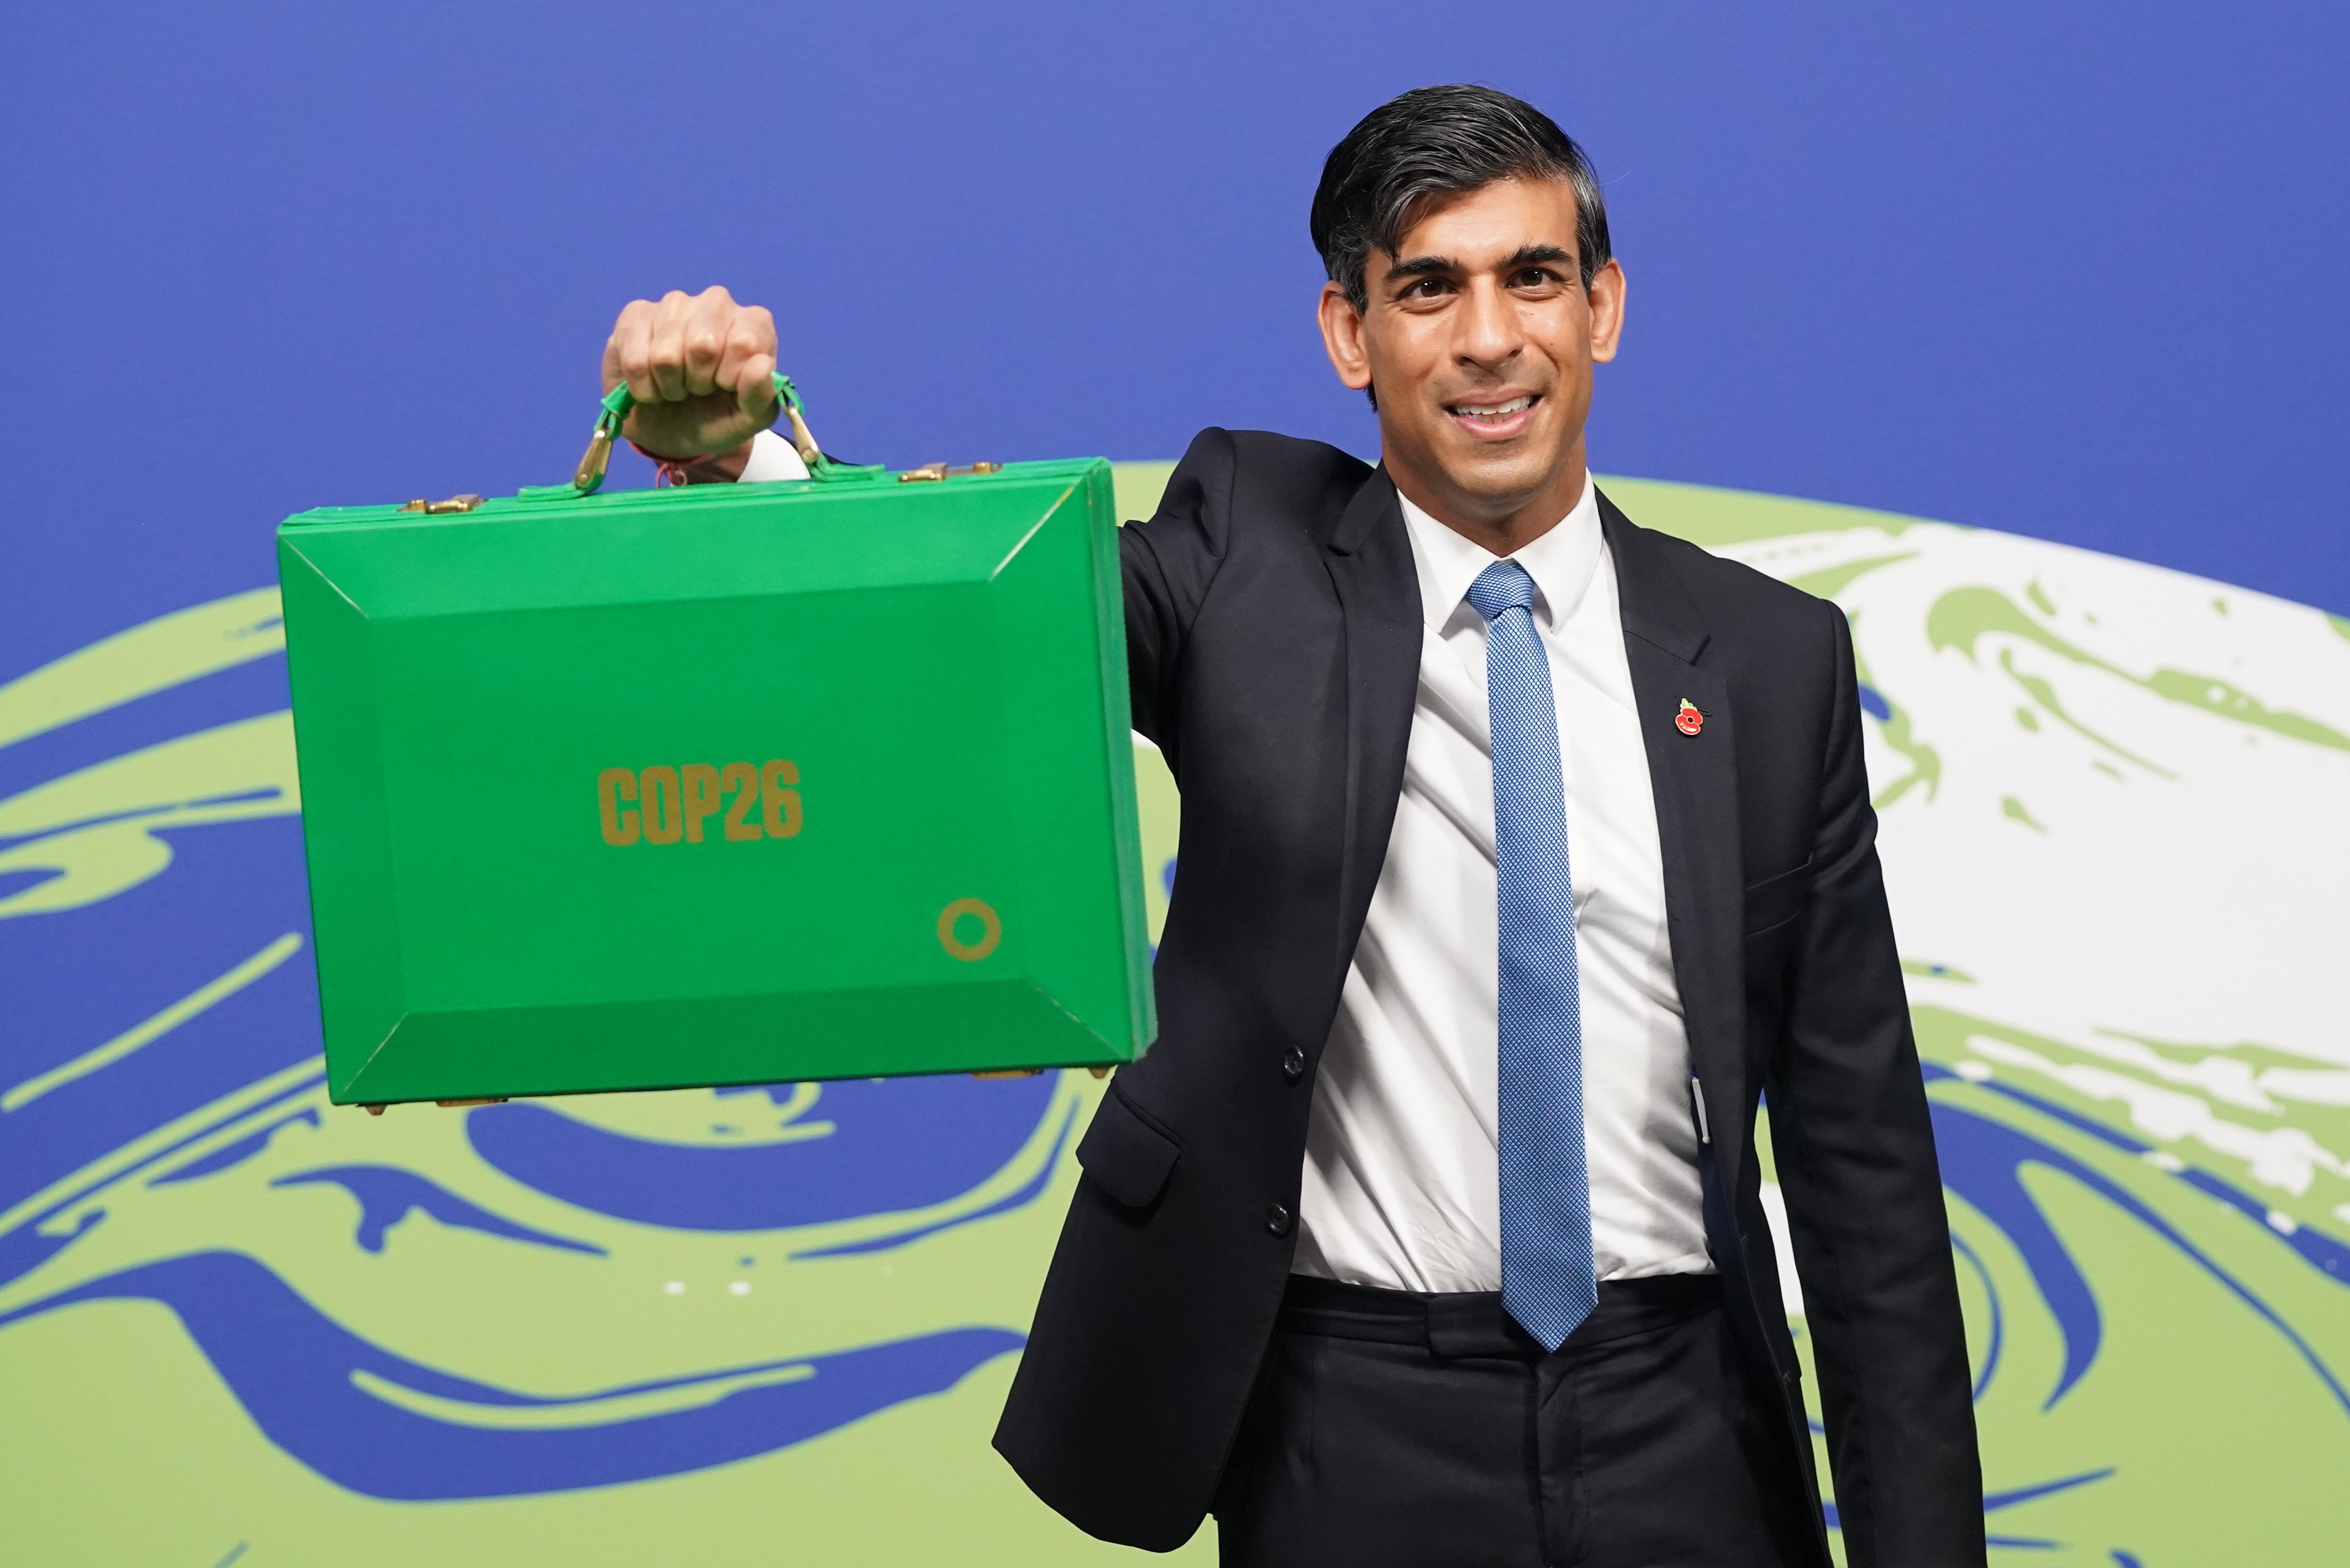 Rishi Sunak attended the previous Cop26 event as chancellor